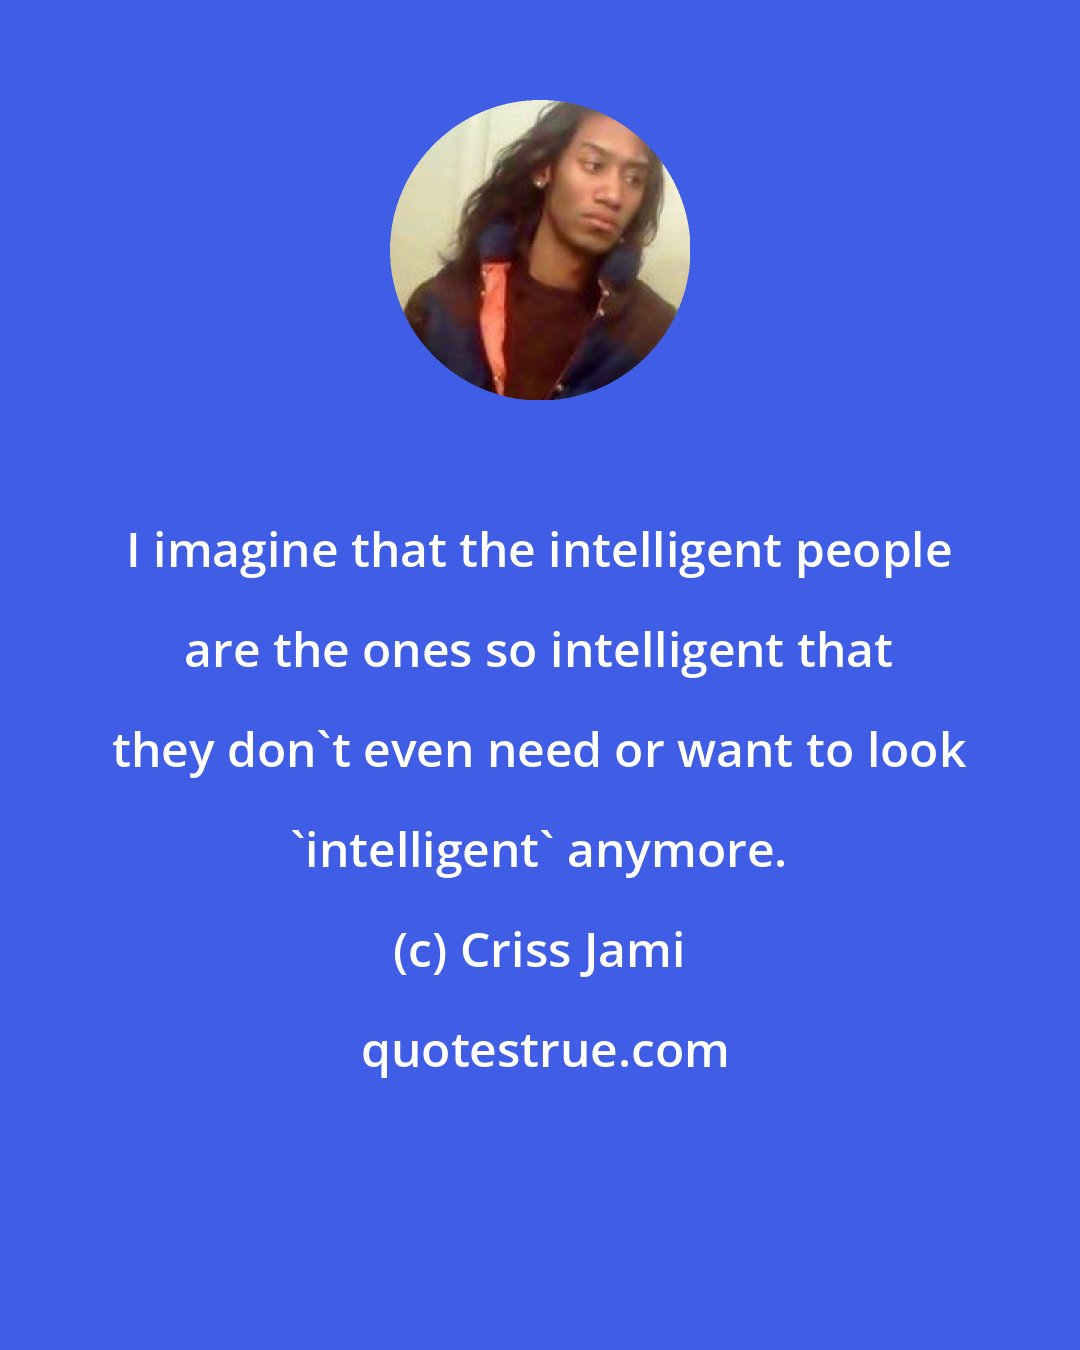 Criss Jami: I imagine that the intelligent people are the ones so intelligent that they don't even need or want to look 'intelligent' anymore.